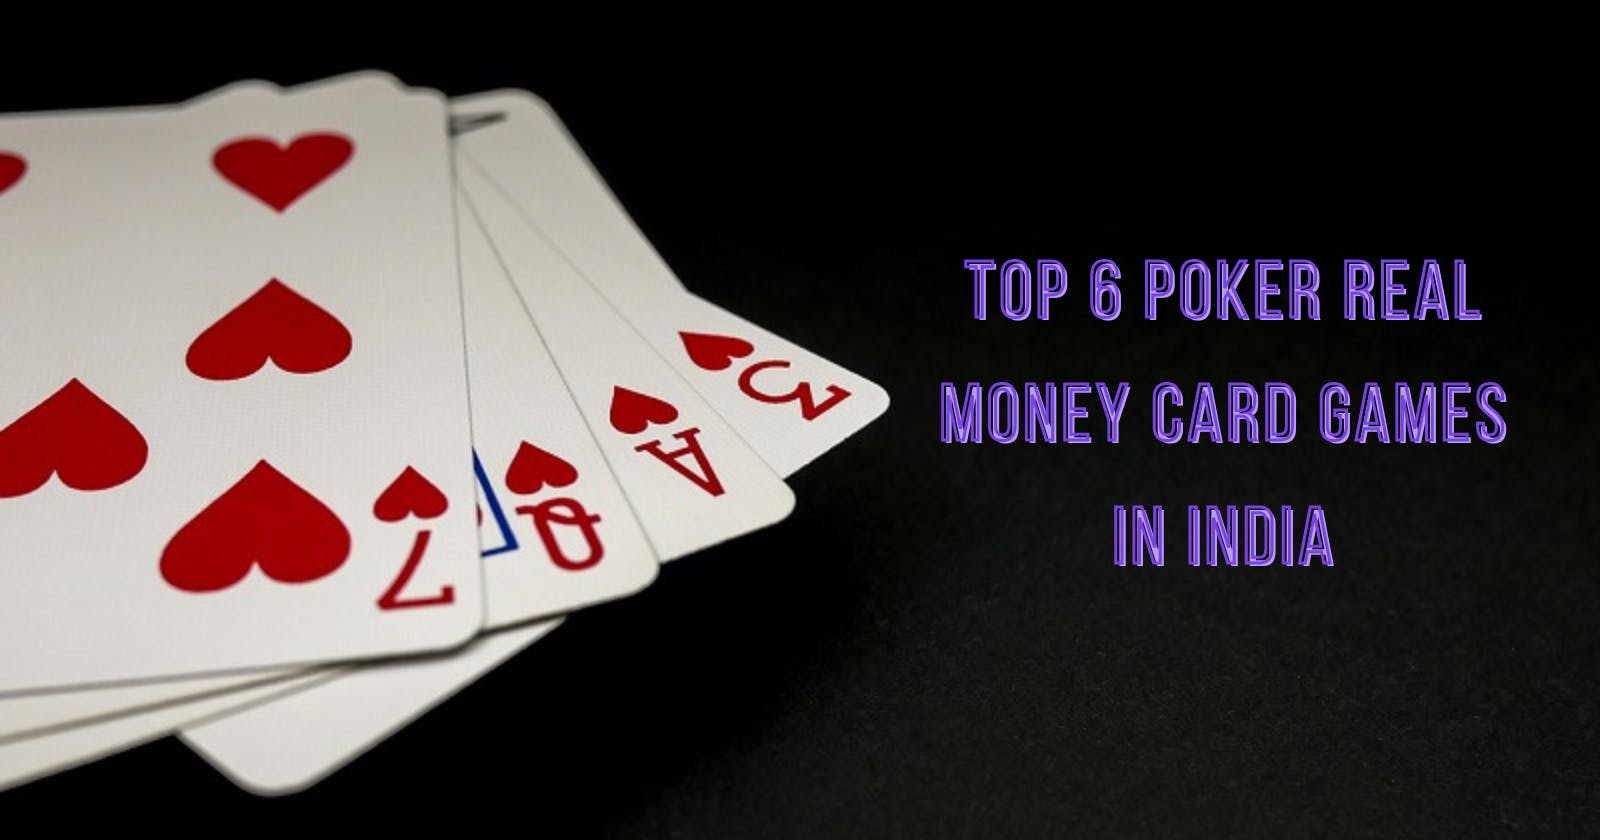 Top 6 Poker Real Money Card Games in India